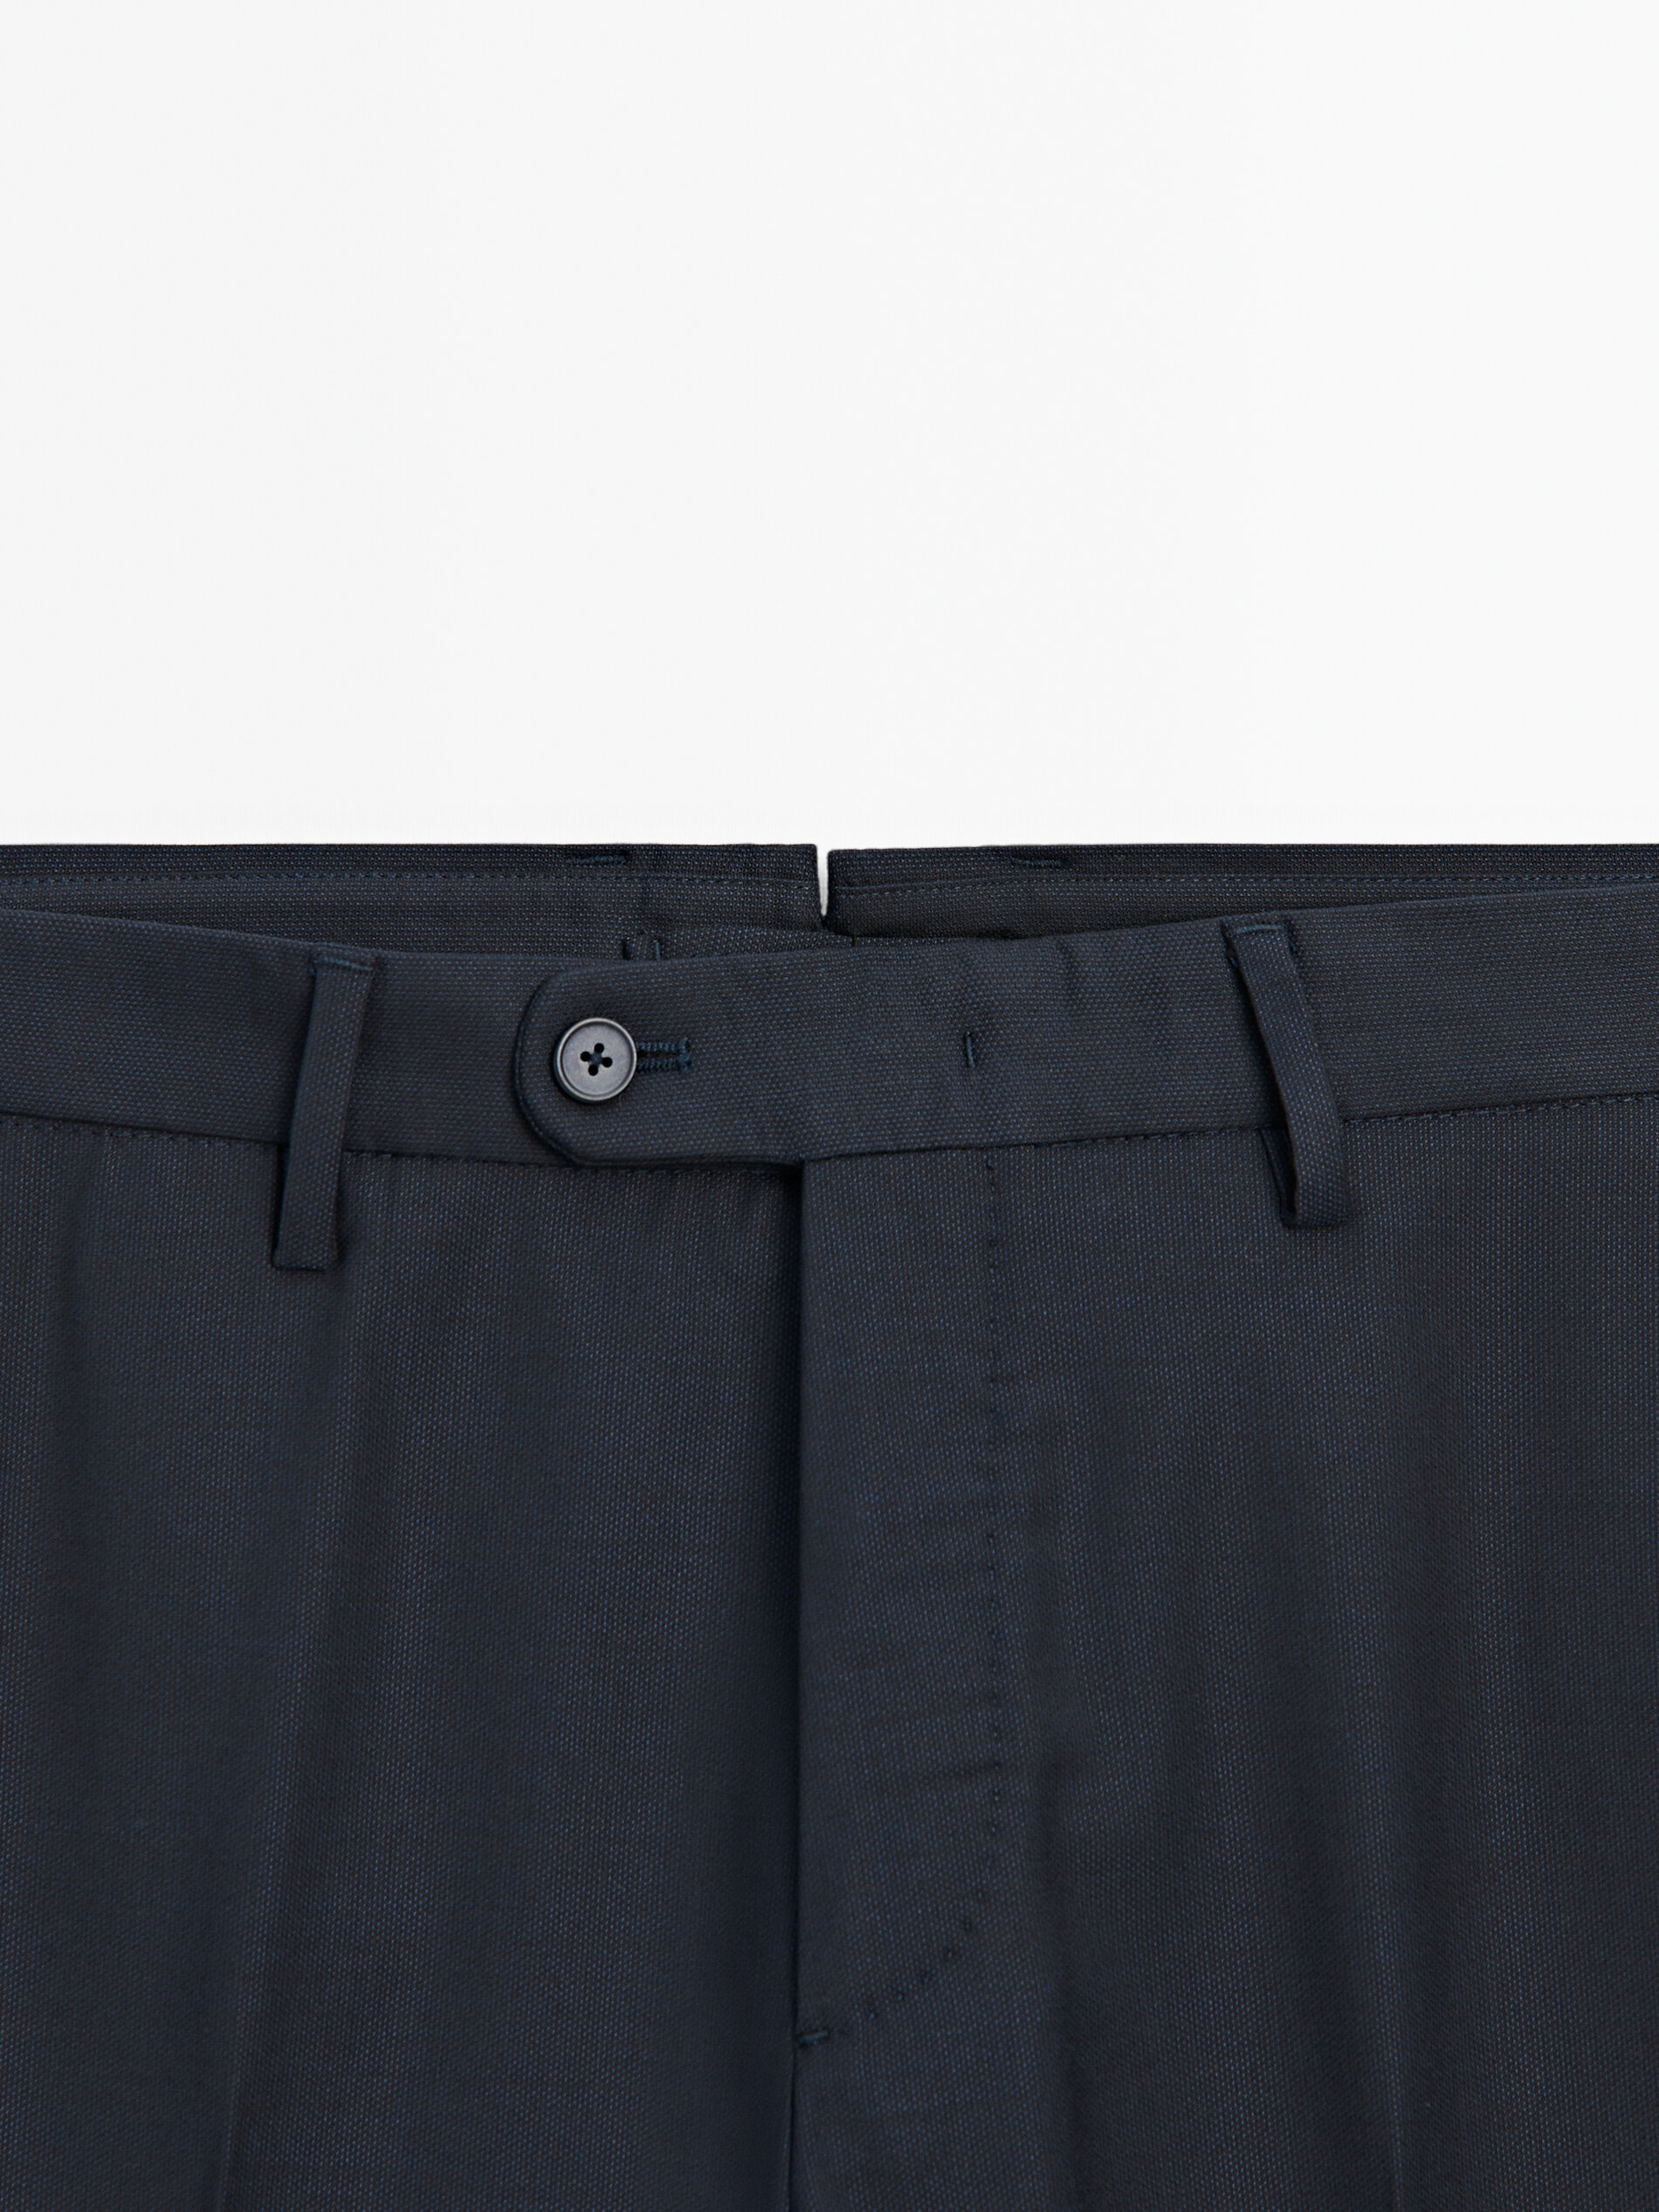 Men's trousers and shorts: chinos, designer and linen | LIU JO